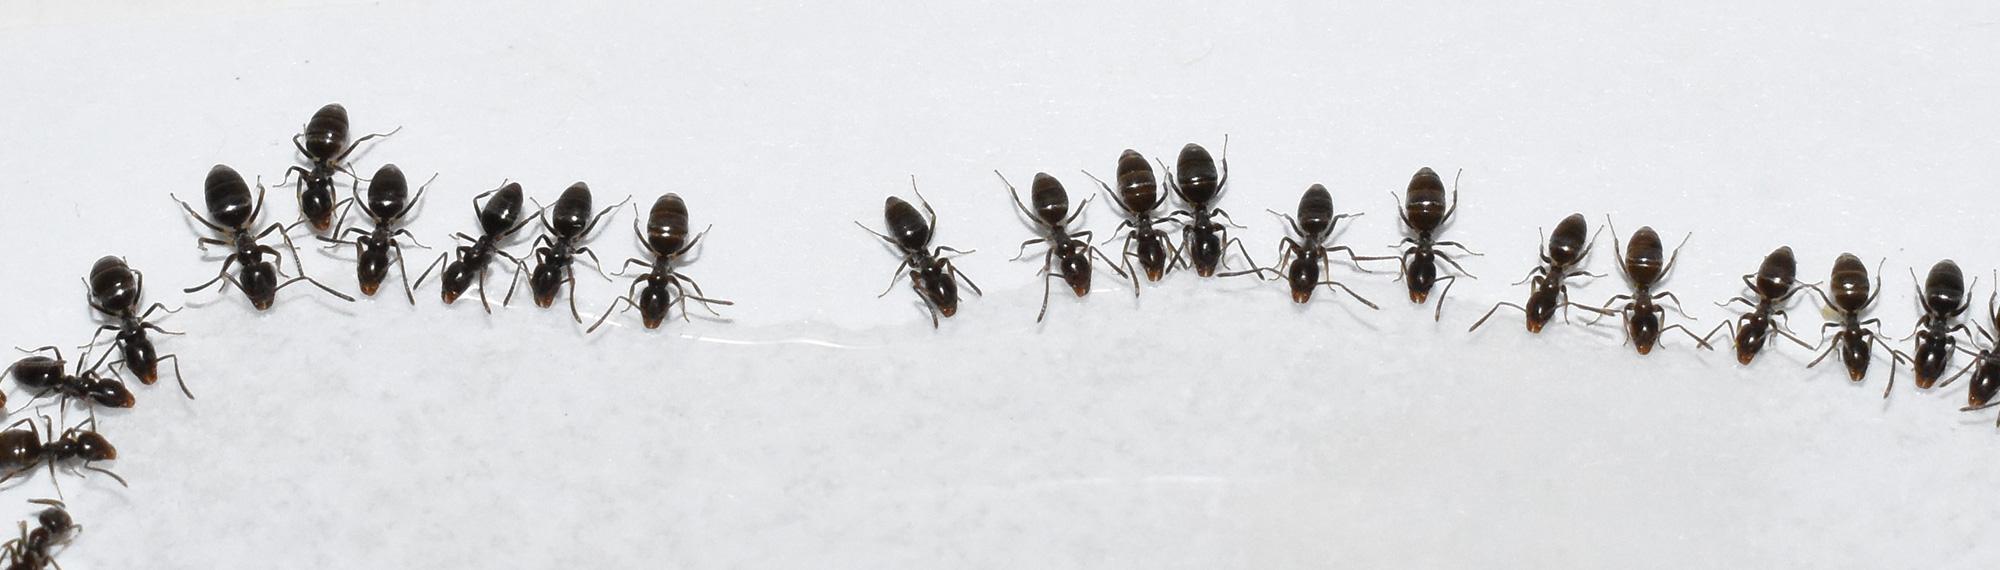 odorous house ants around a spill